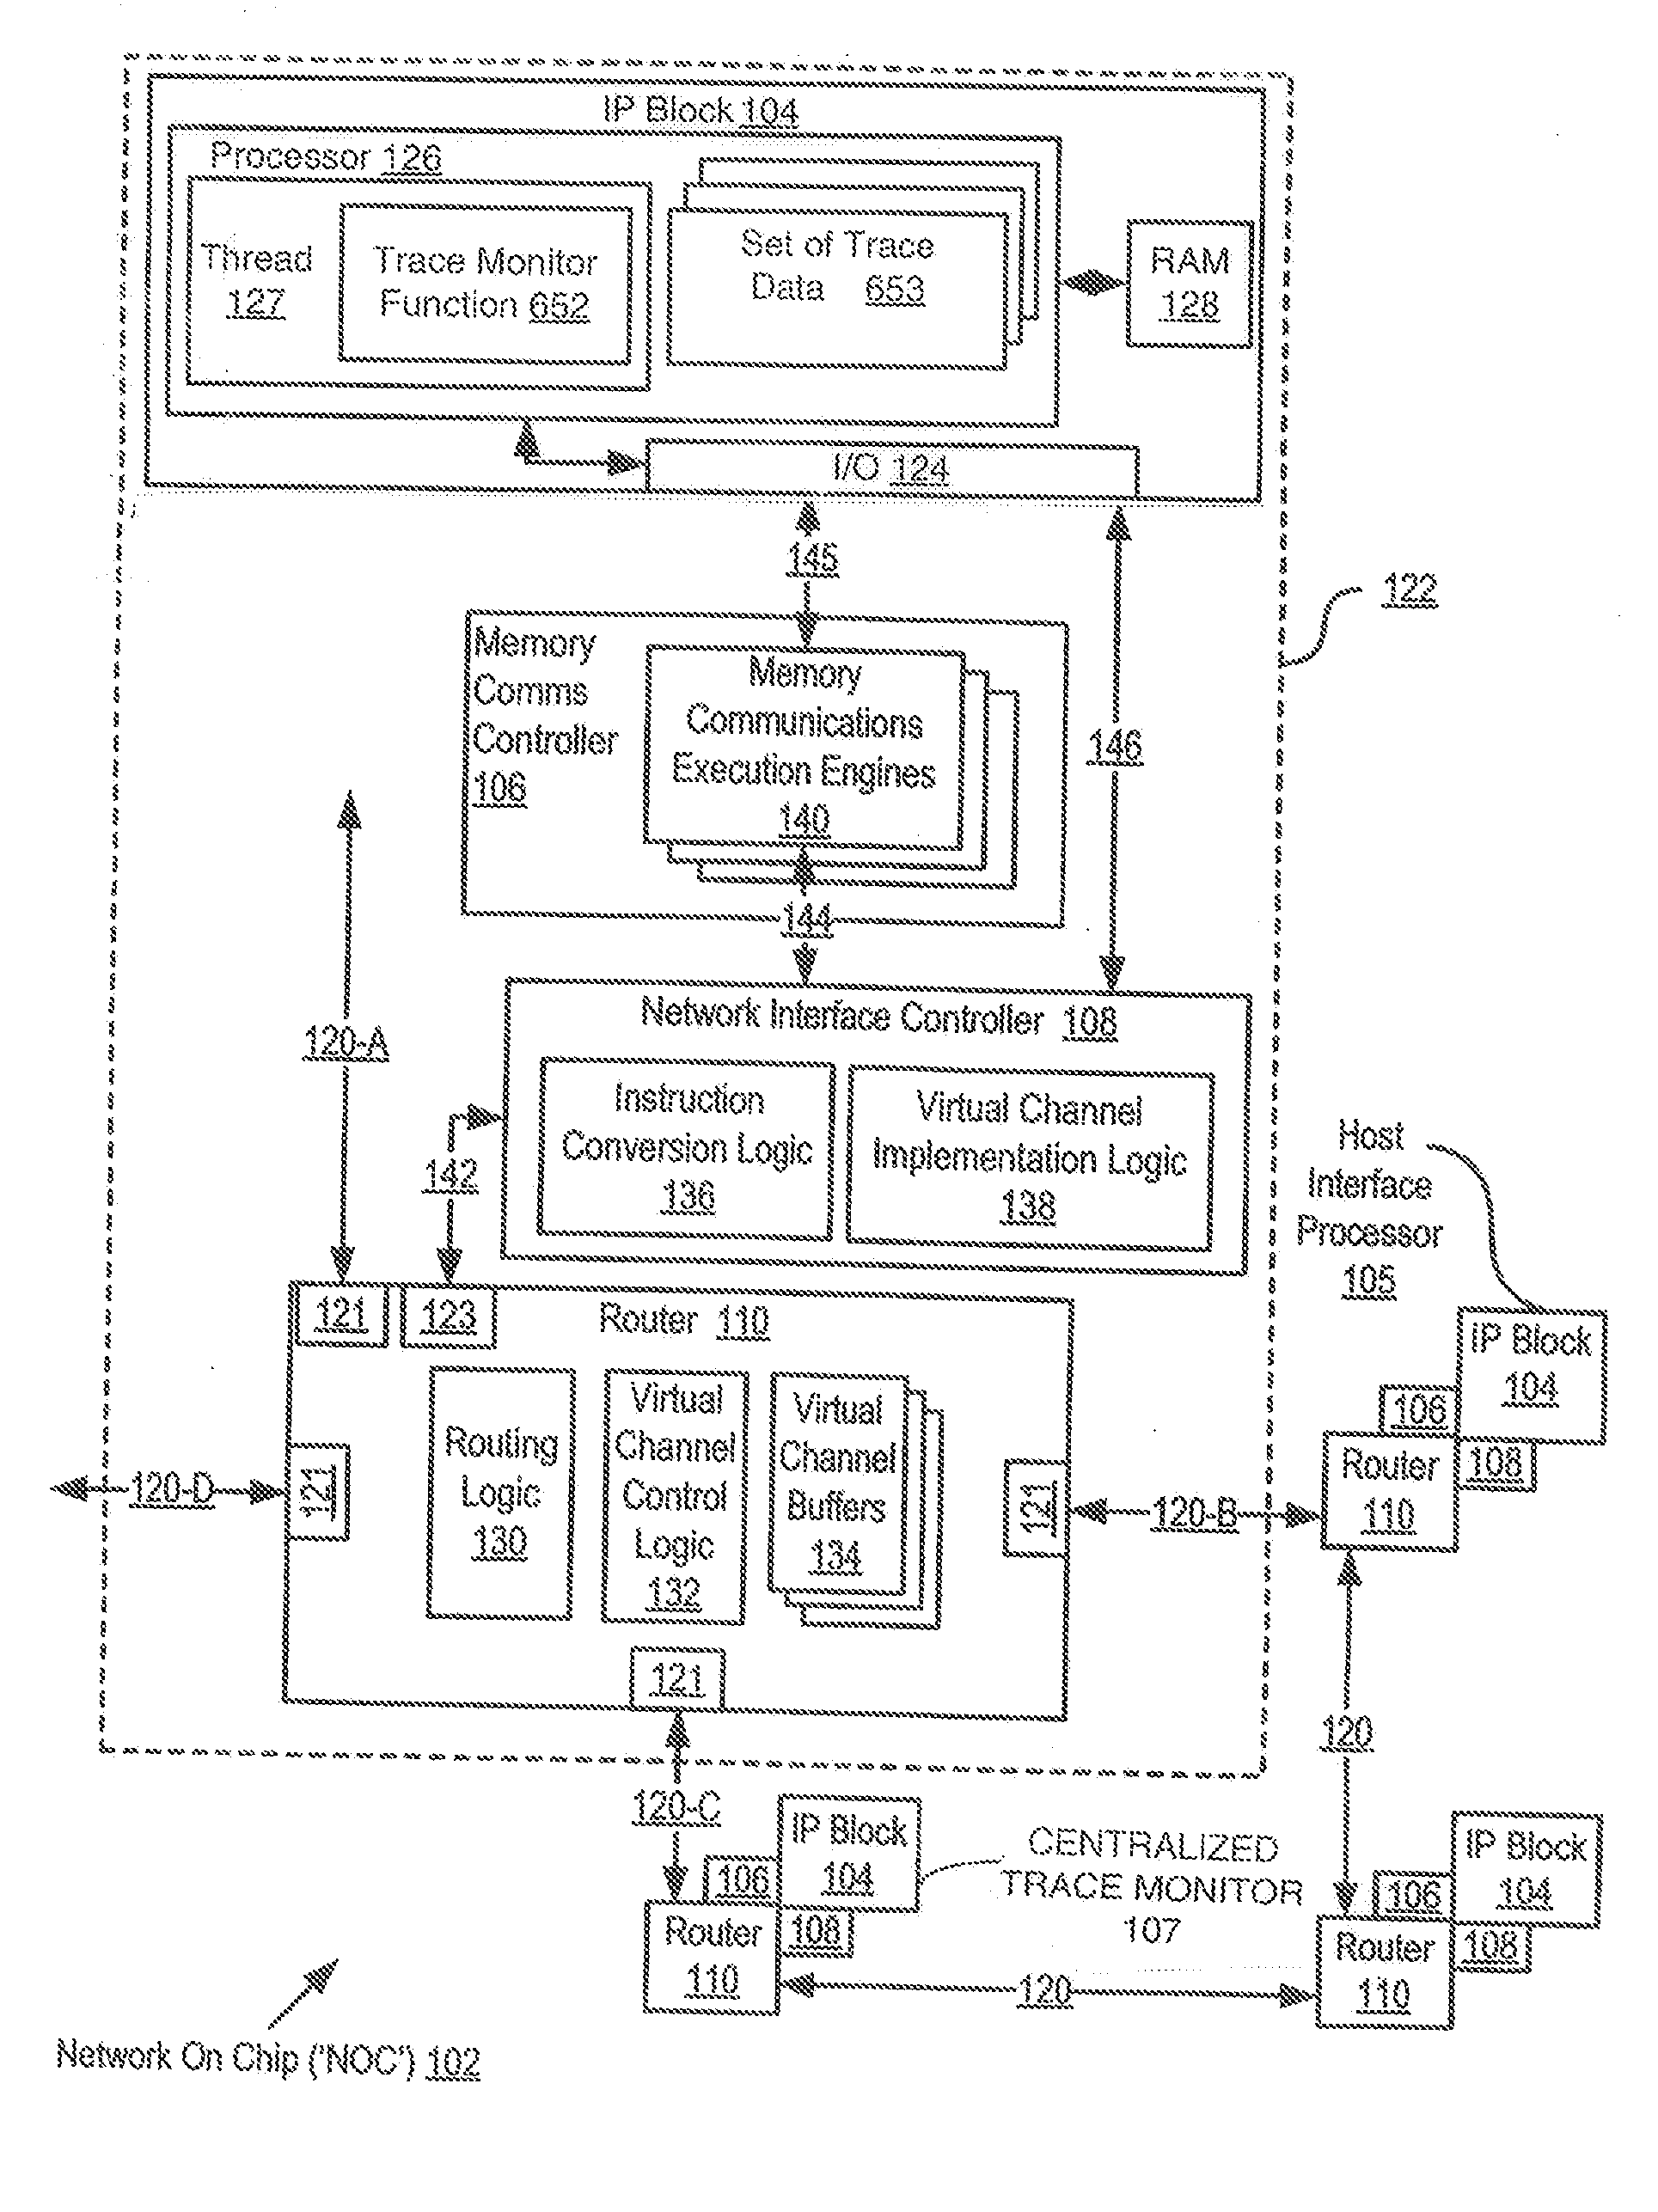 Software Trace Collection and Analysis Utilizing Direct Interthread Communication On A Network On Chip